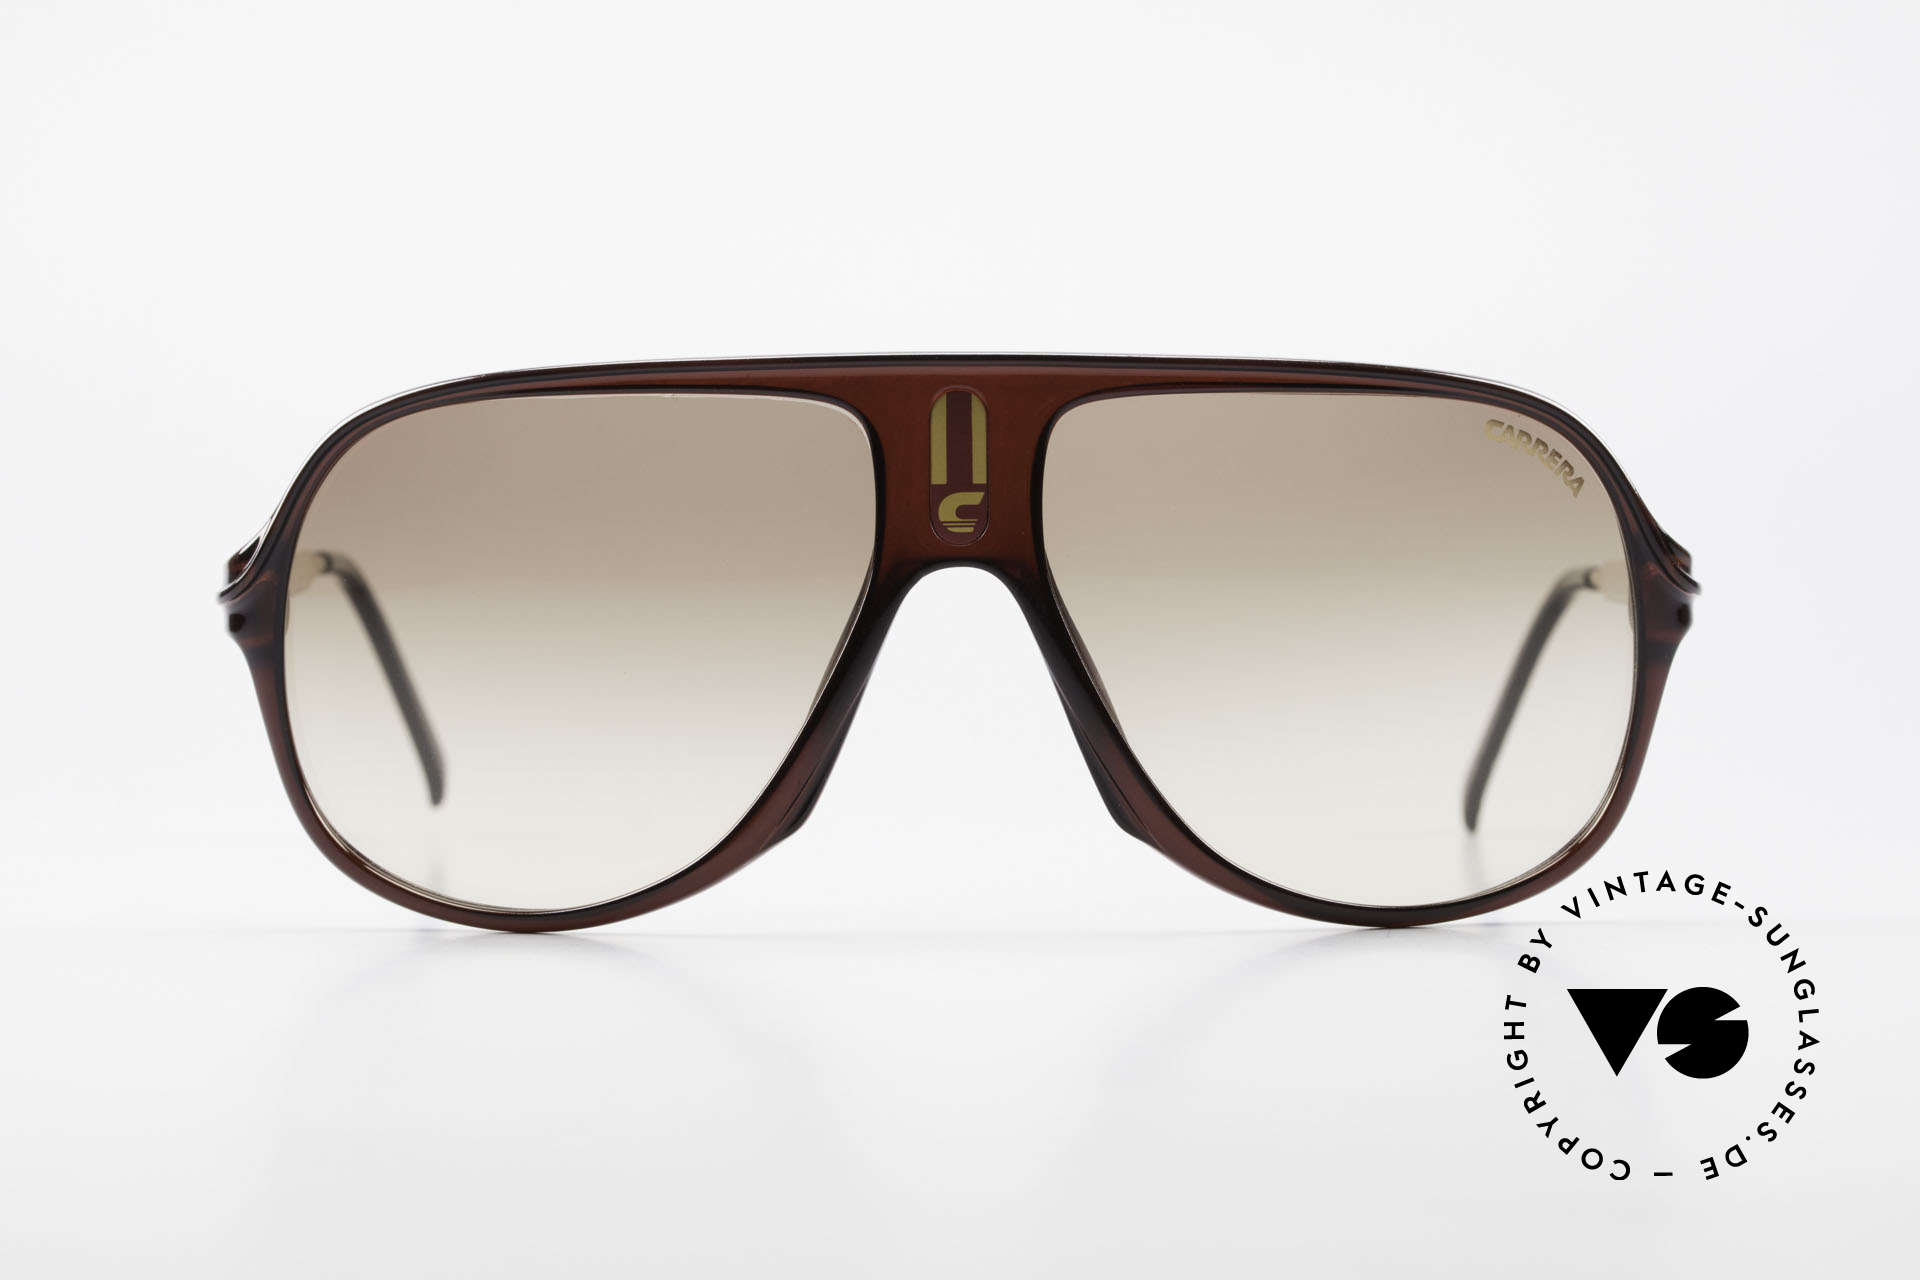 Carrera 5547 80's Vintage Shades No Retro, very sturdy frame by famous Optyl (1st class quality), Made for Men